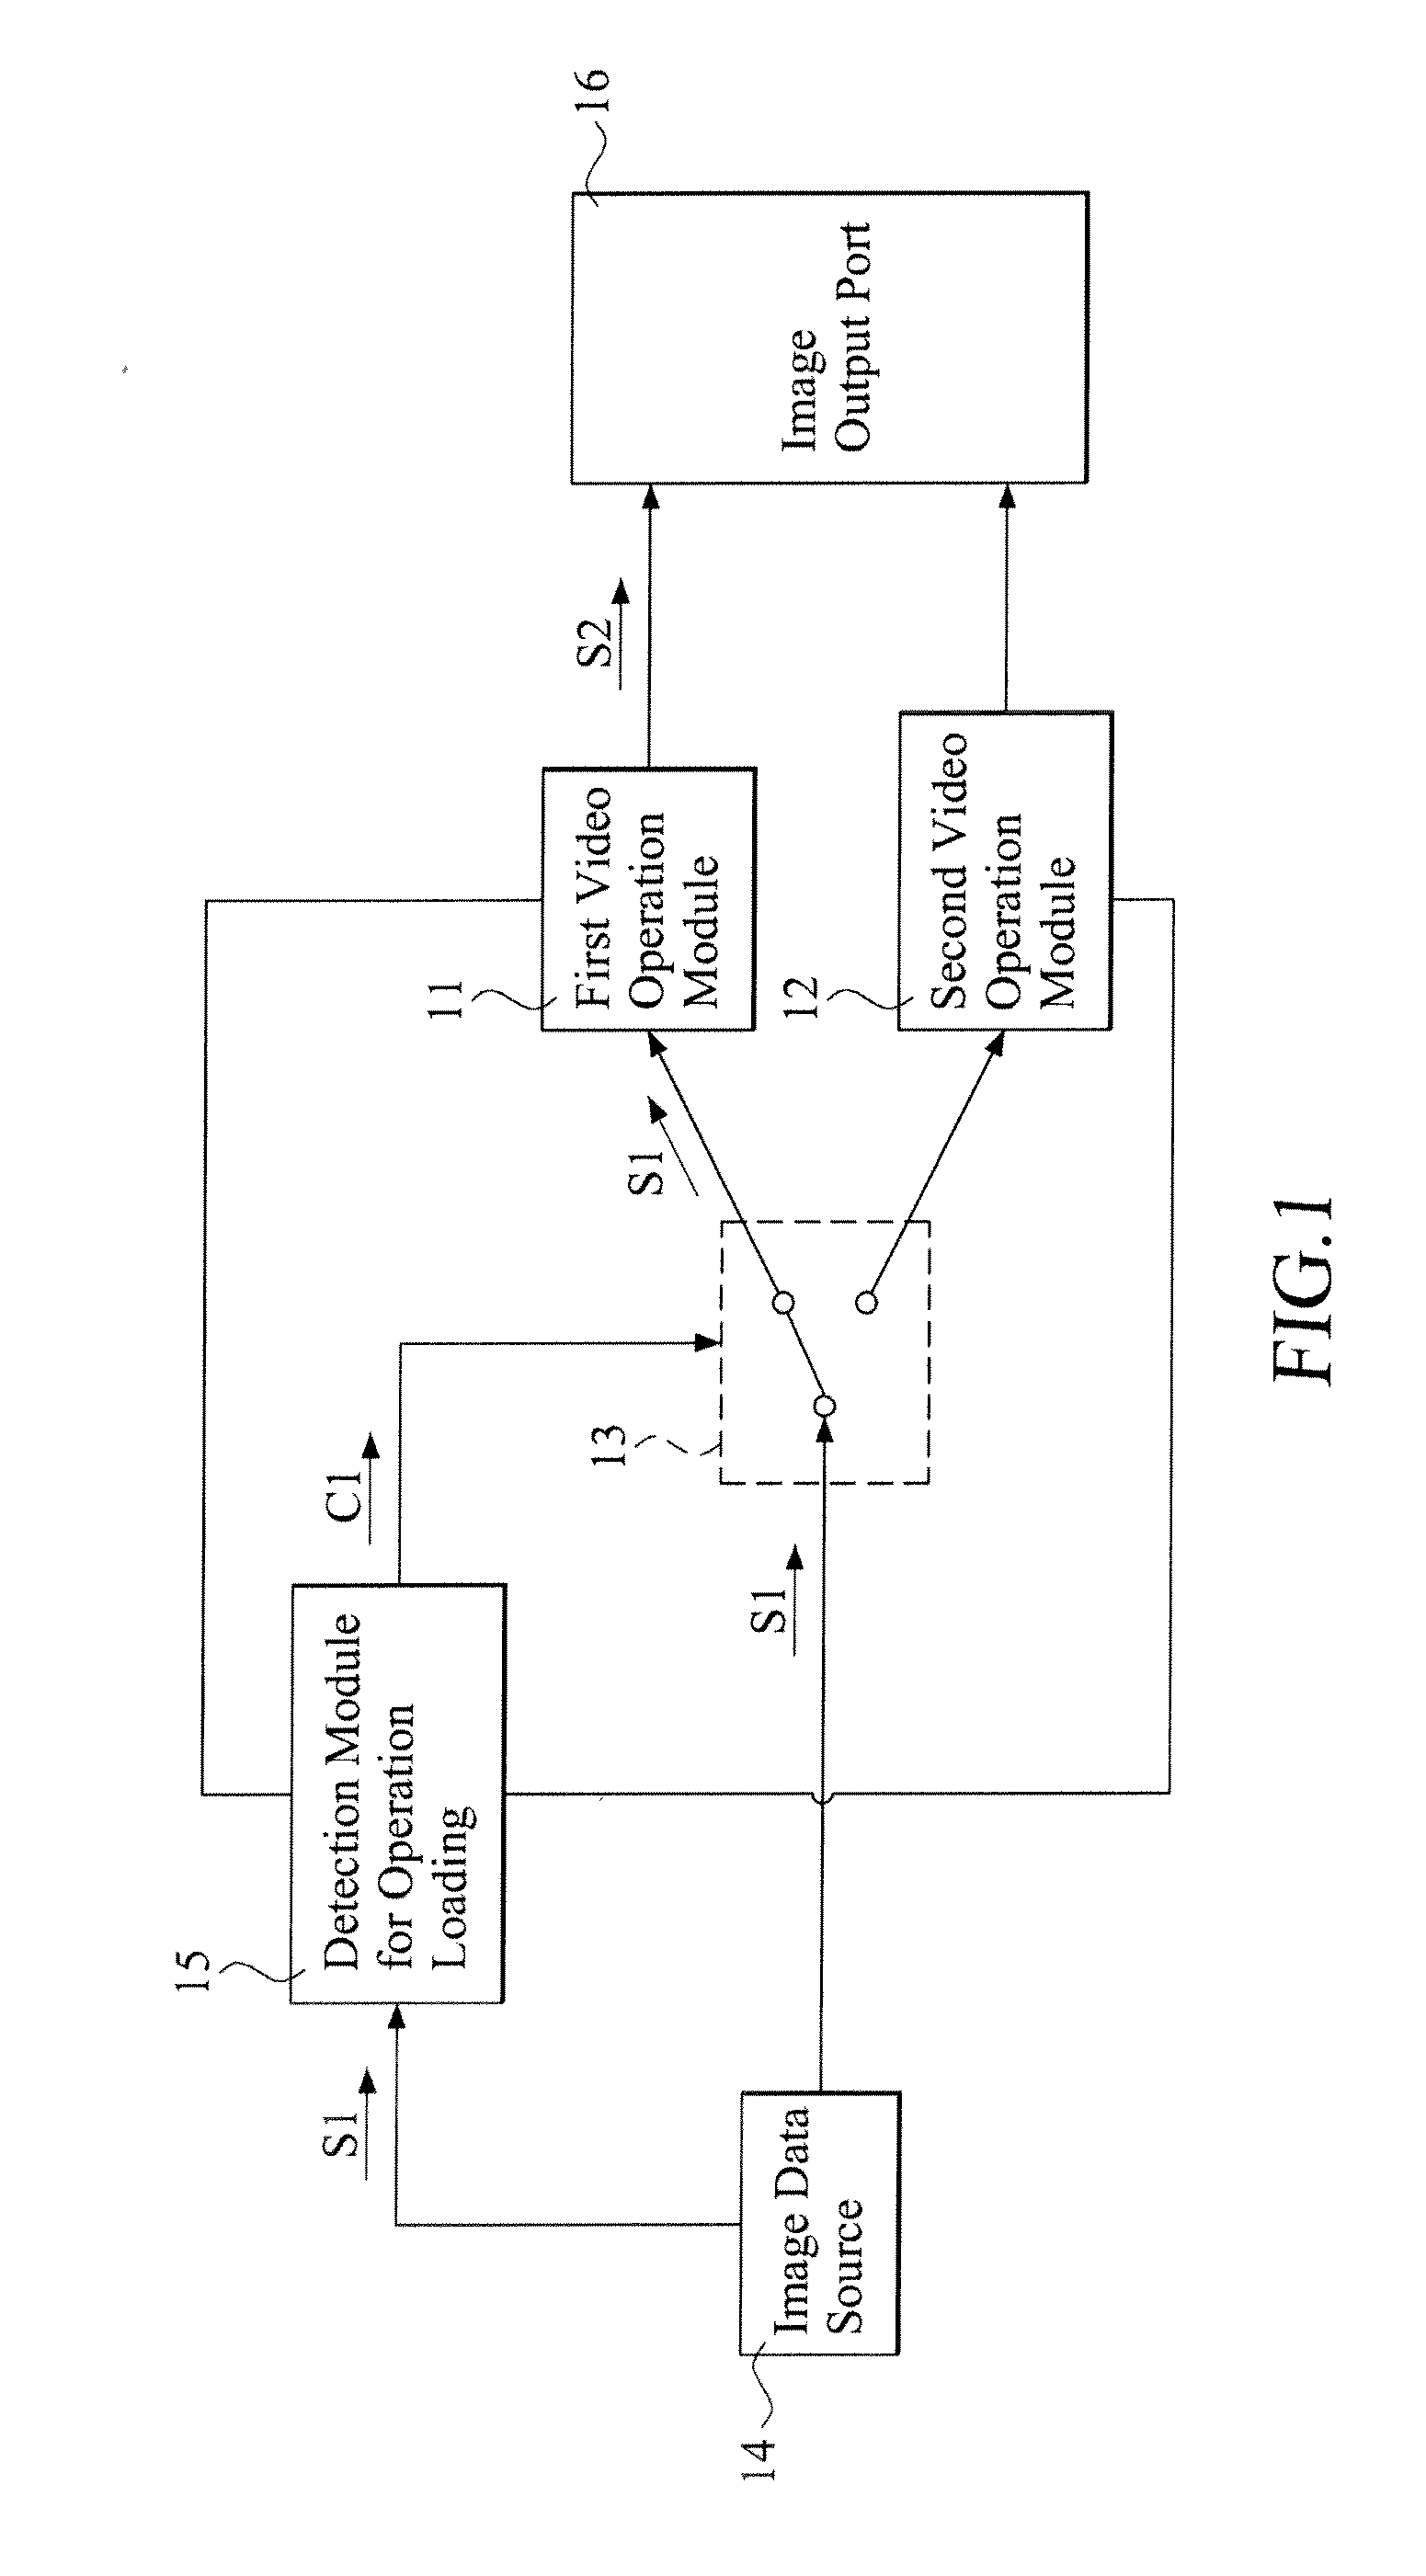 Detection switch system for video operation modules